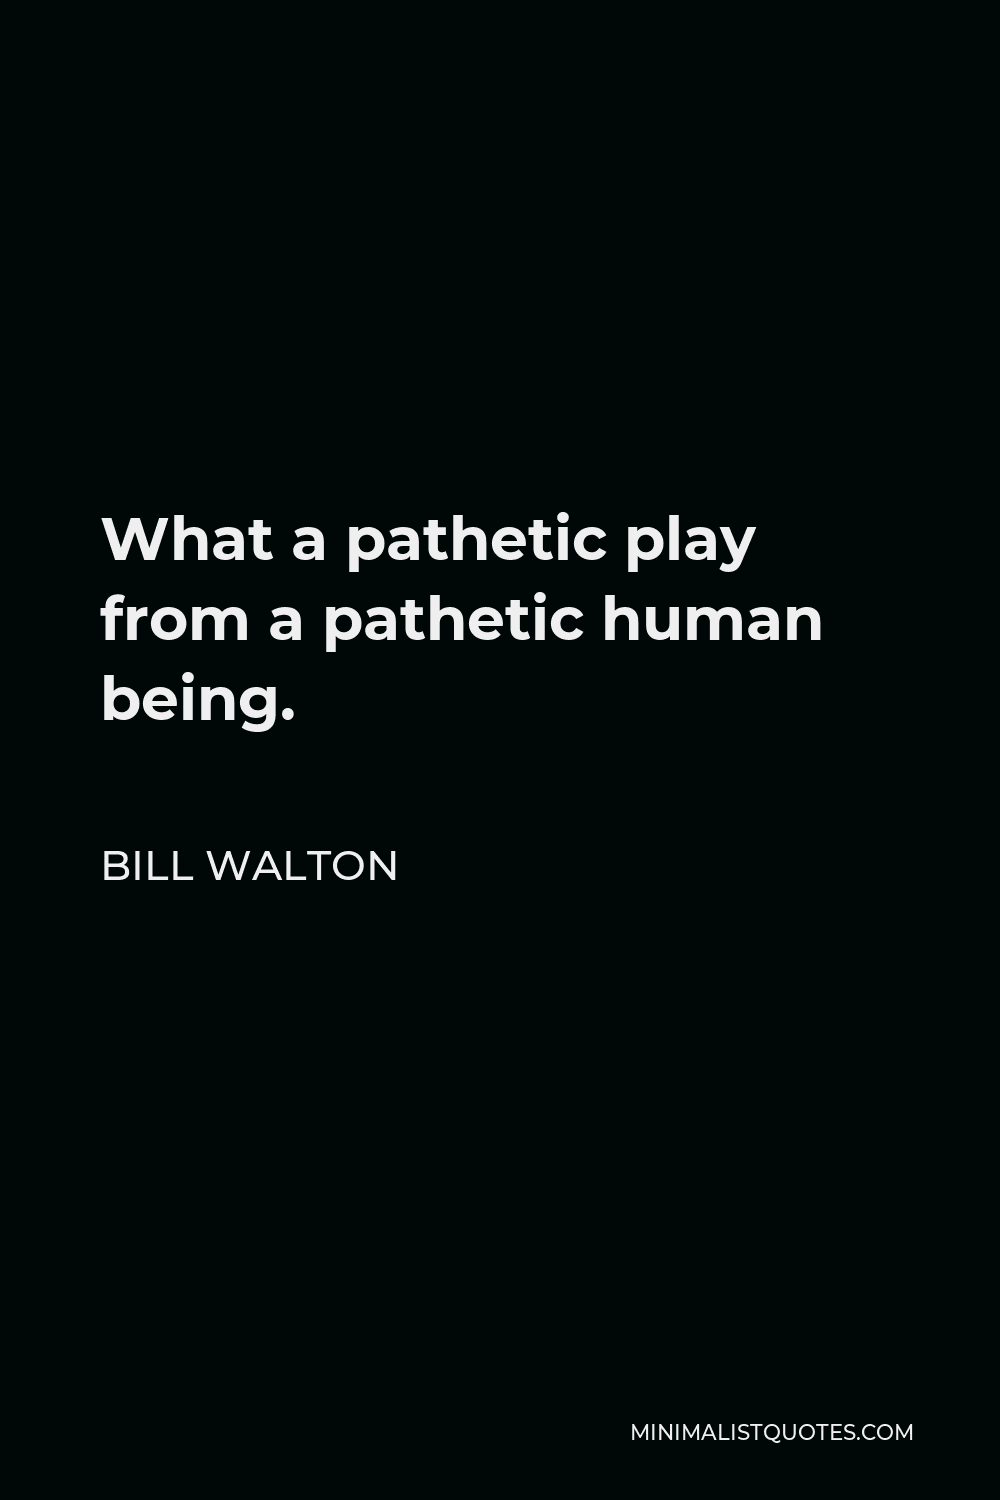 Bill Walton Quote - What a pathetic play from a pathetic human being.